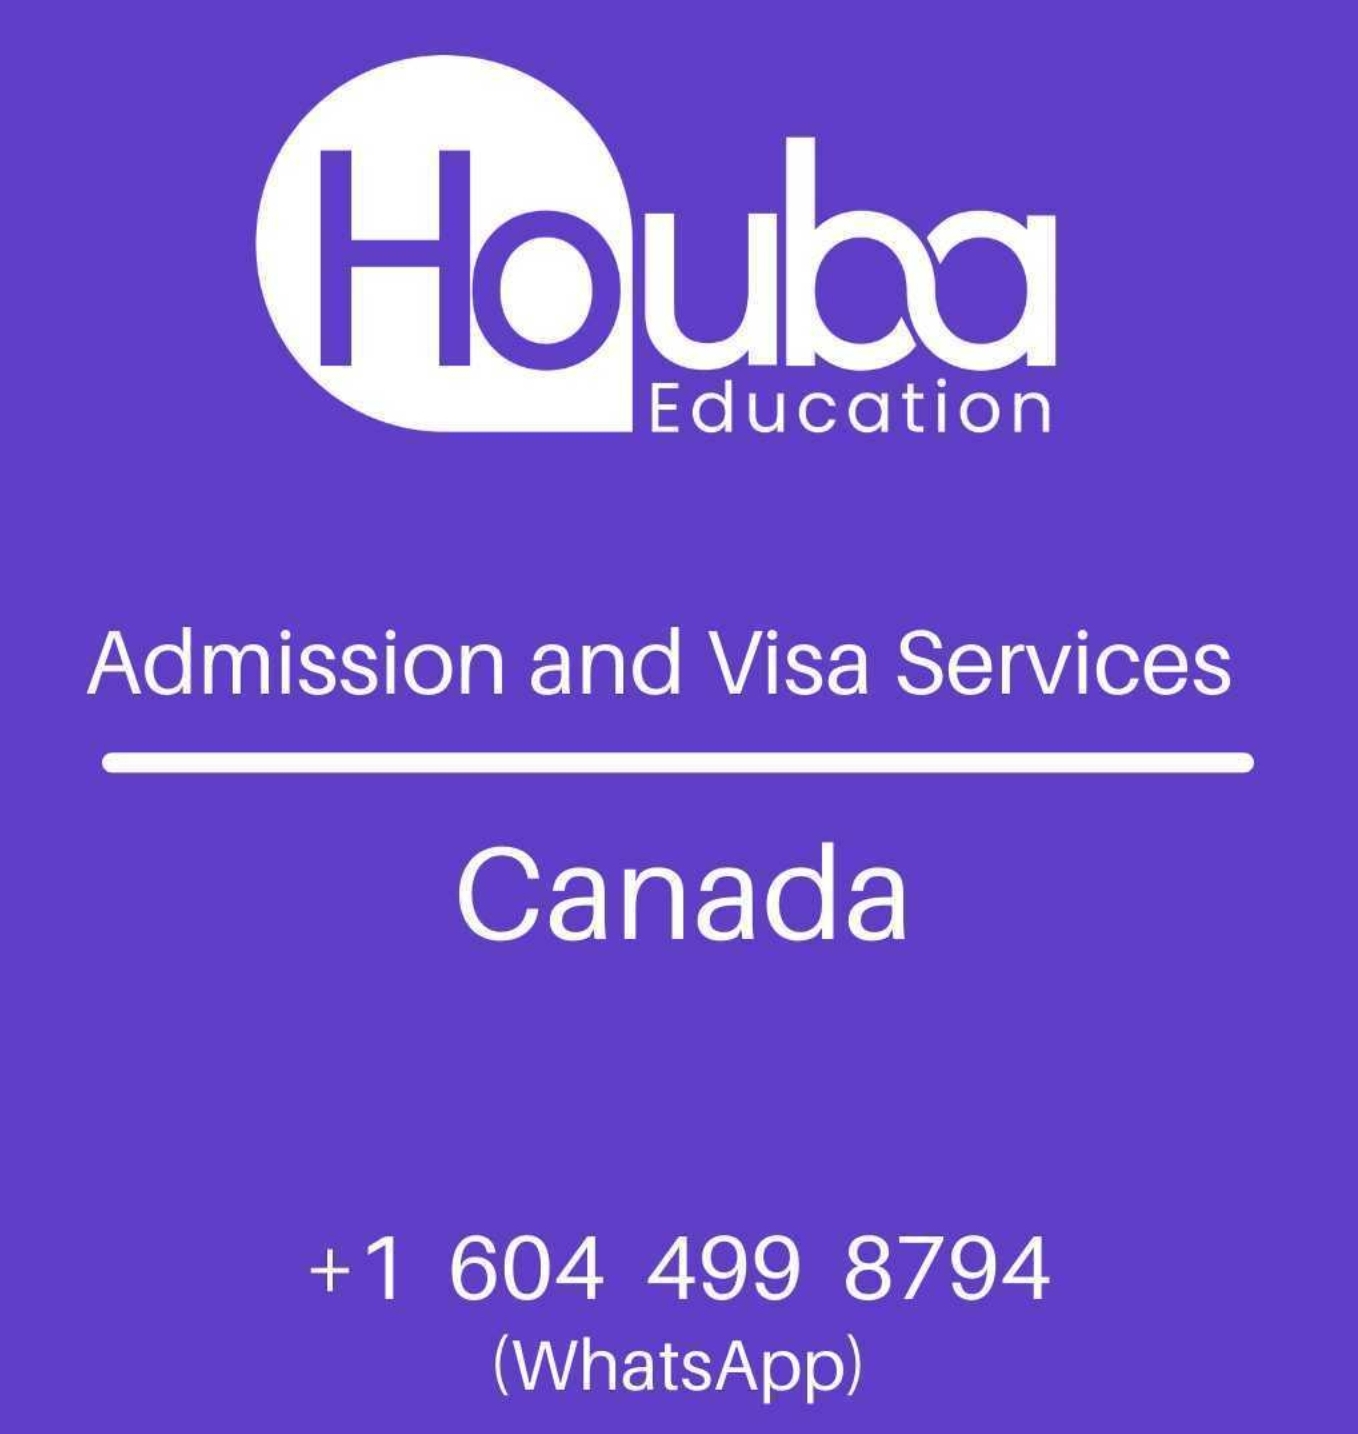 Admission and Visa Services1